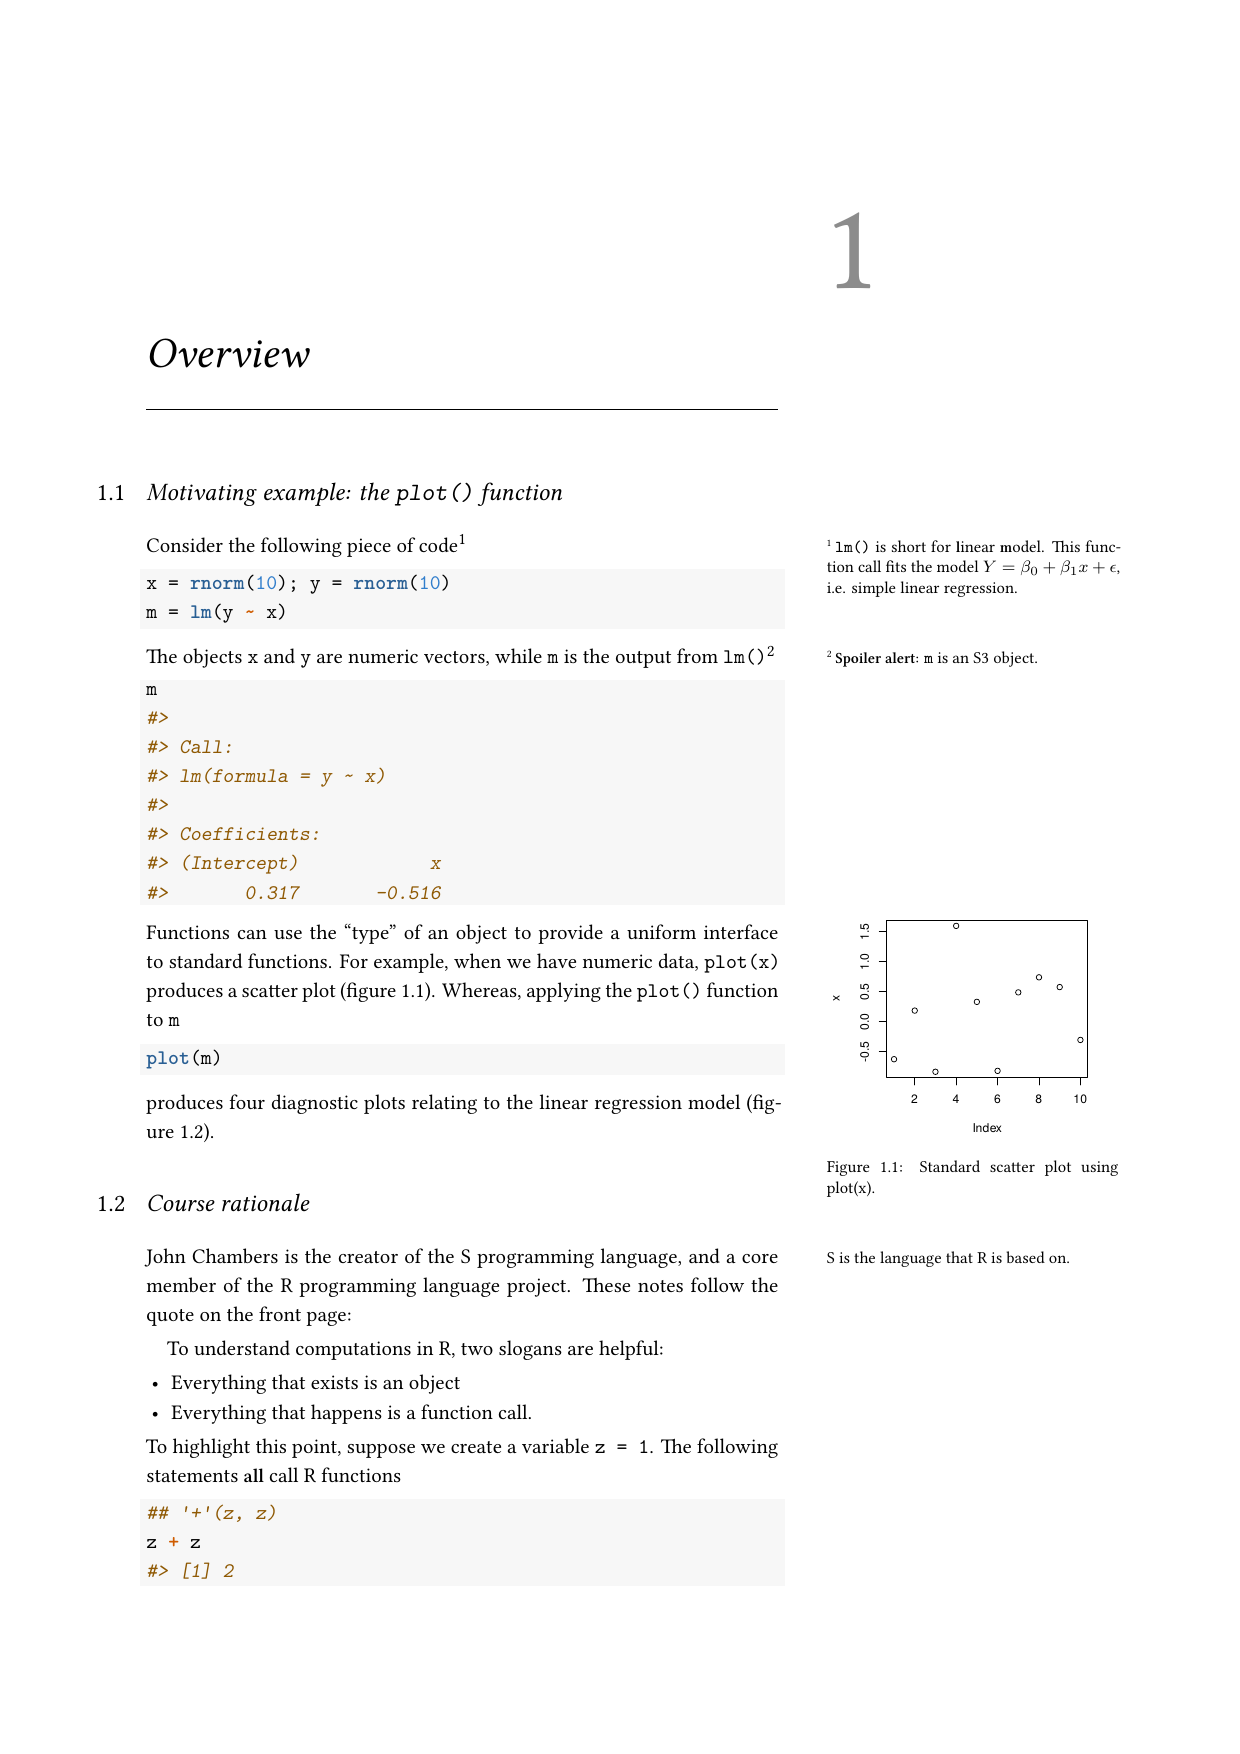 Page 2 of example course material for Object Oriented Programming in R